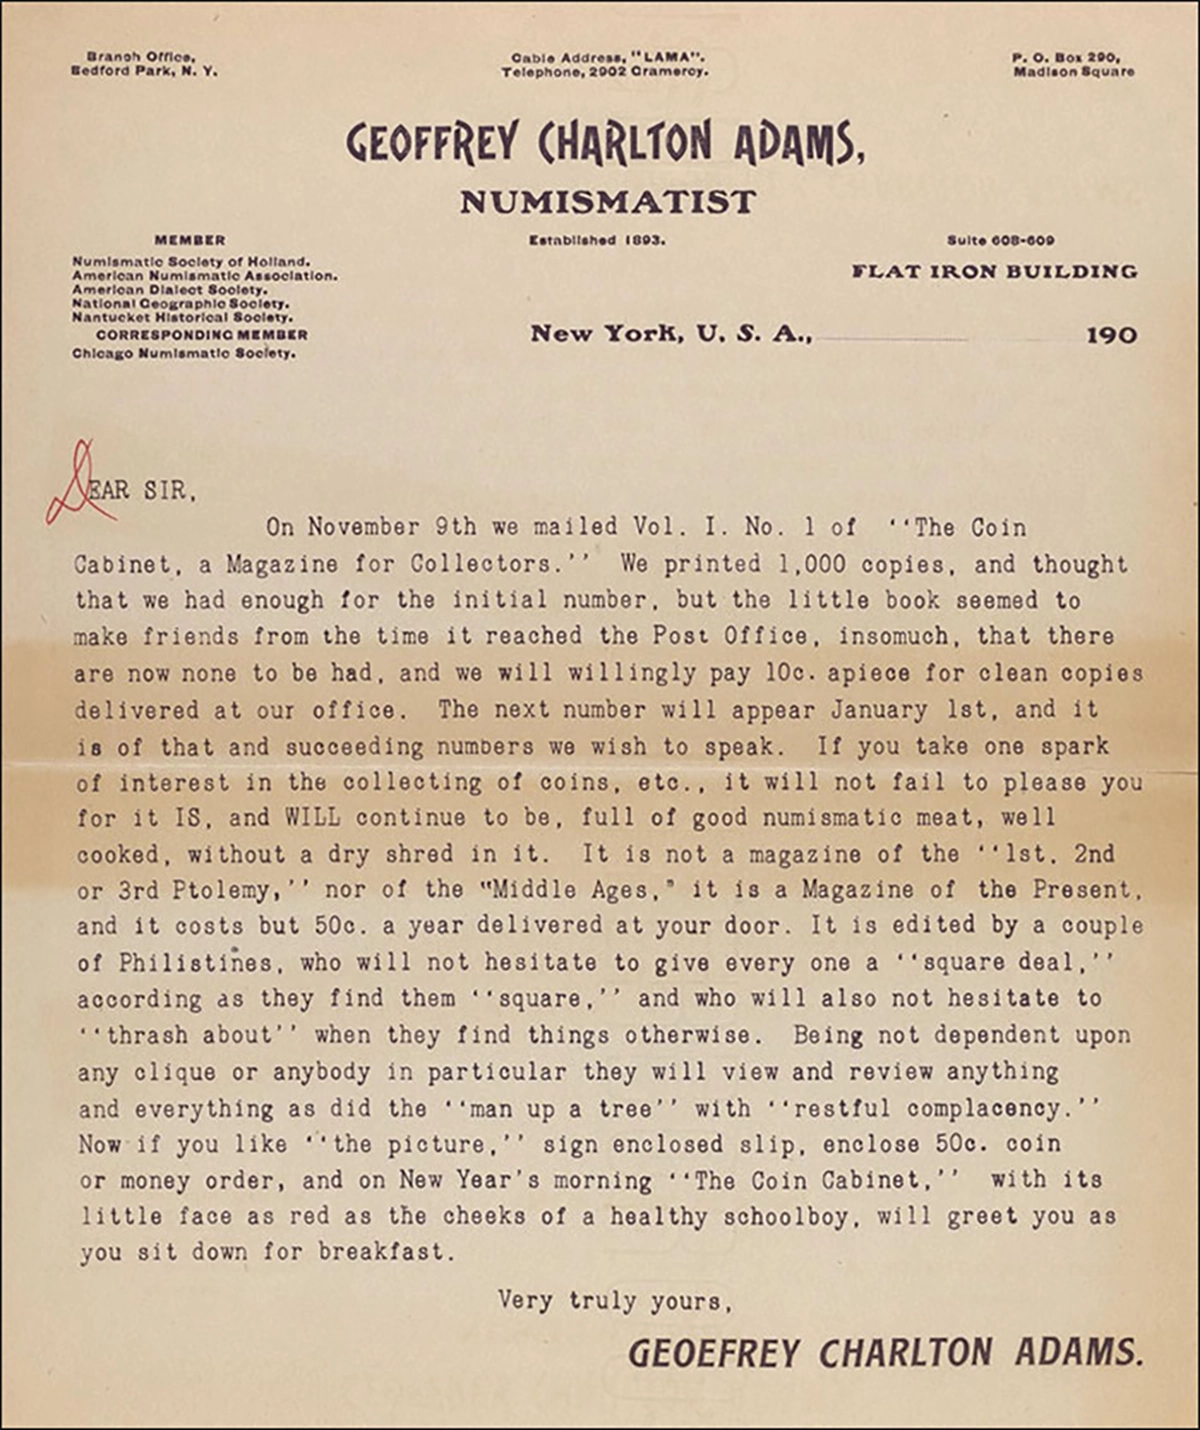 Solicitation for The Coin Cabinet on Geoffrey Charlton Adams' letterhead. Here Adams claims that his business was established in 1893. Image: Newman Numismatic Portal.